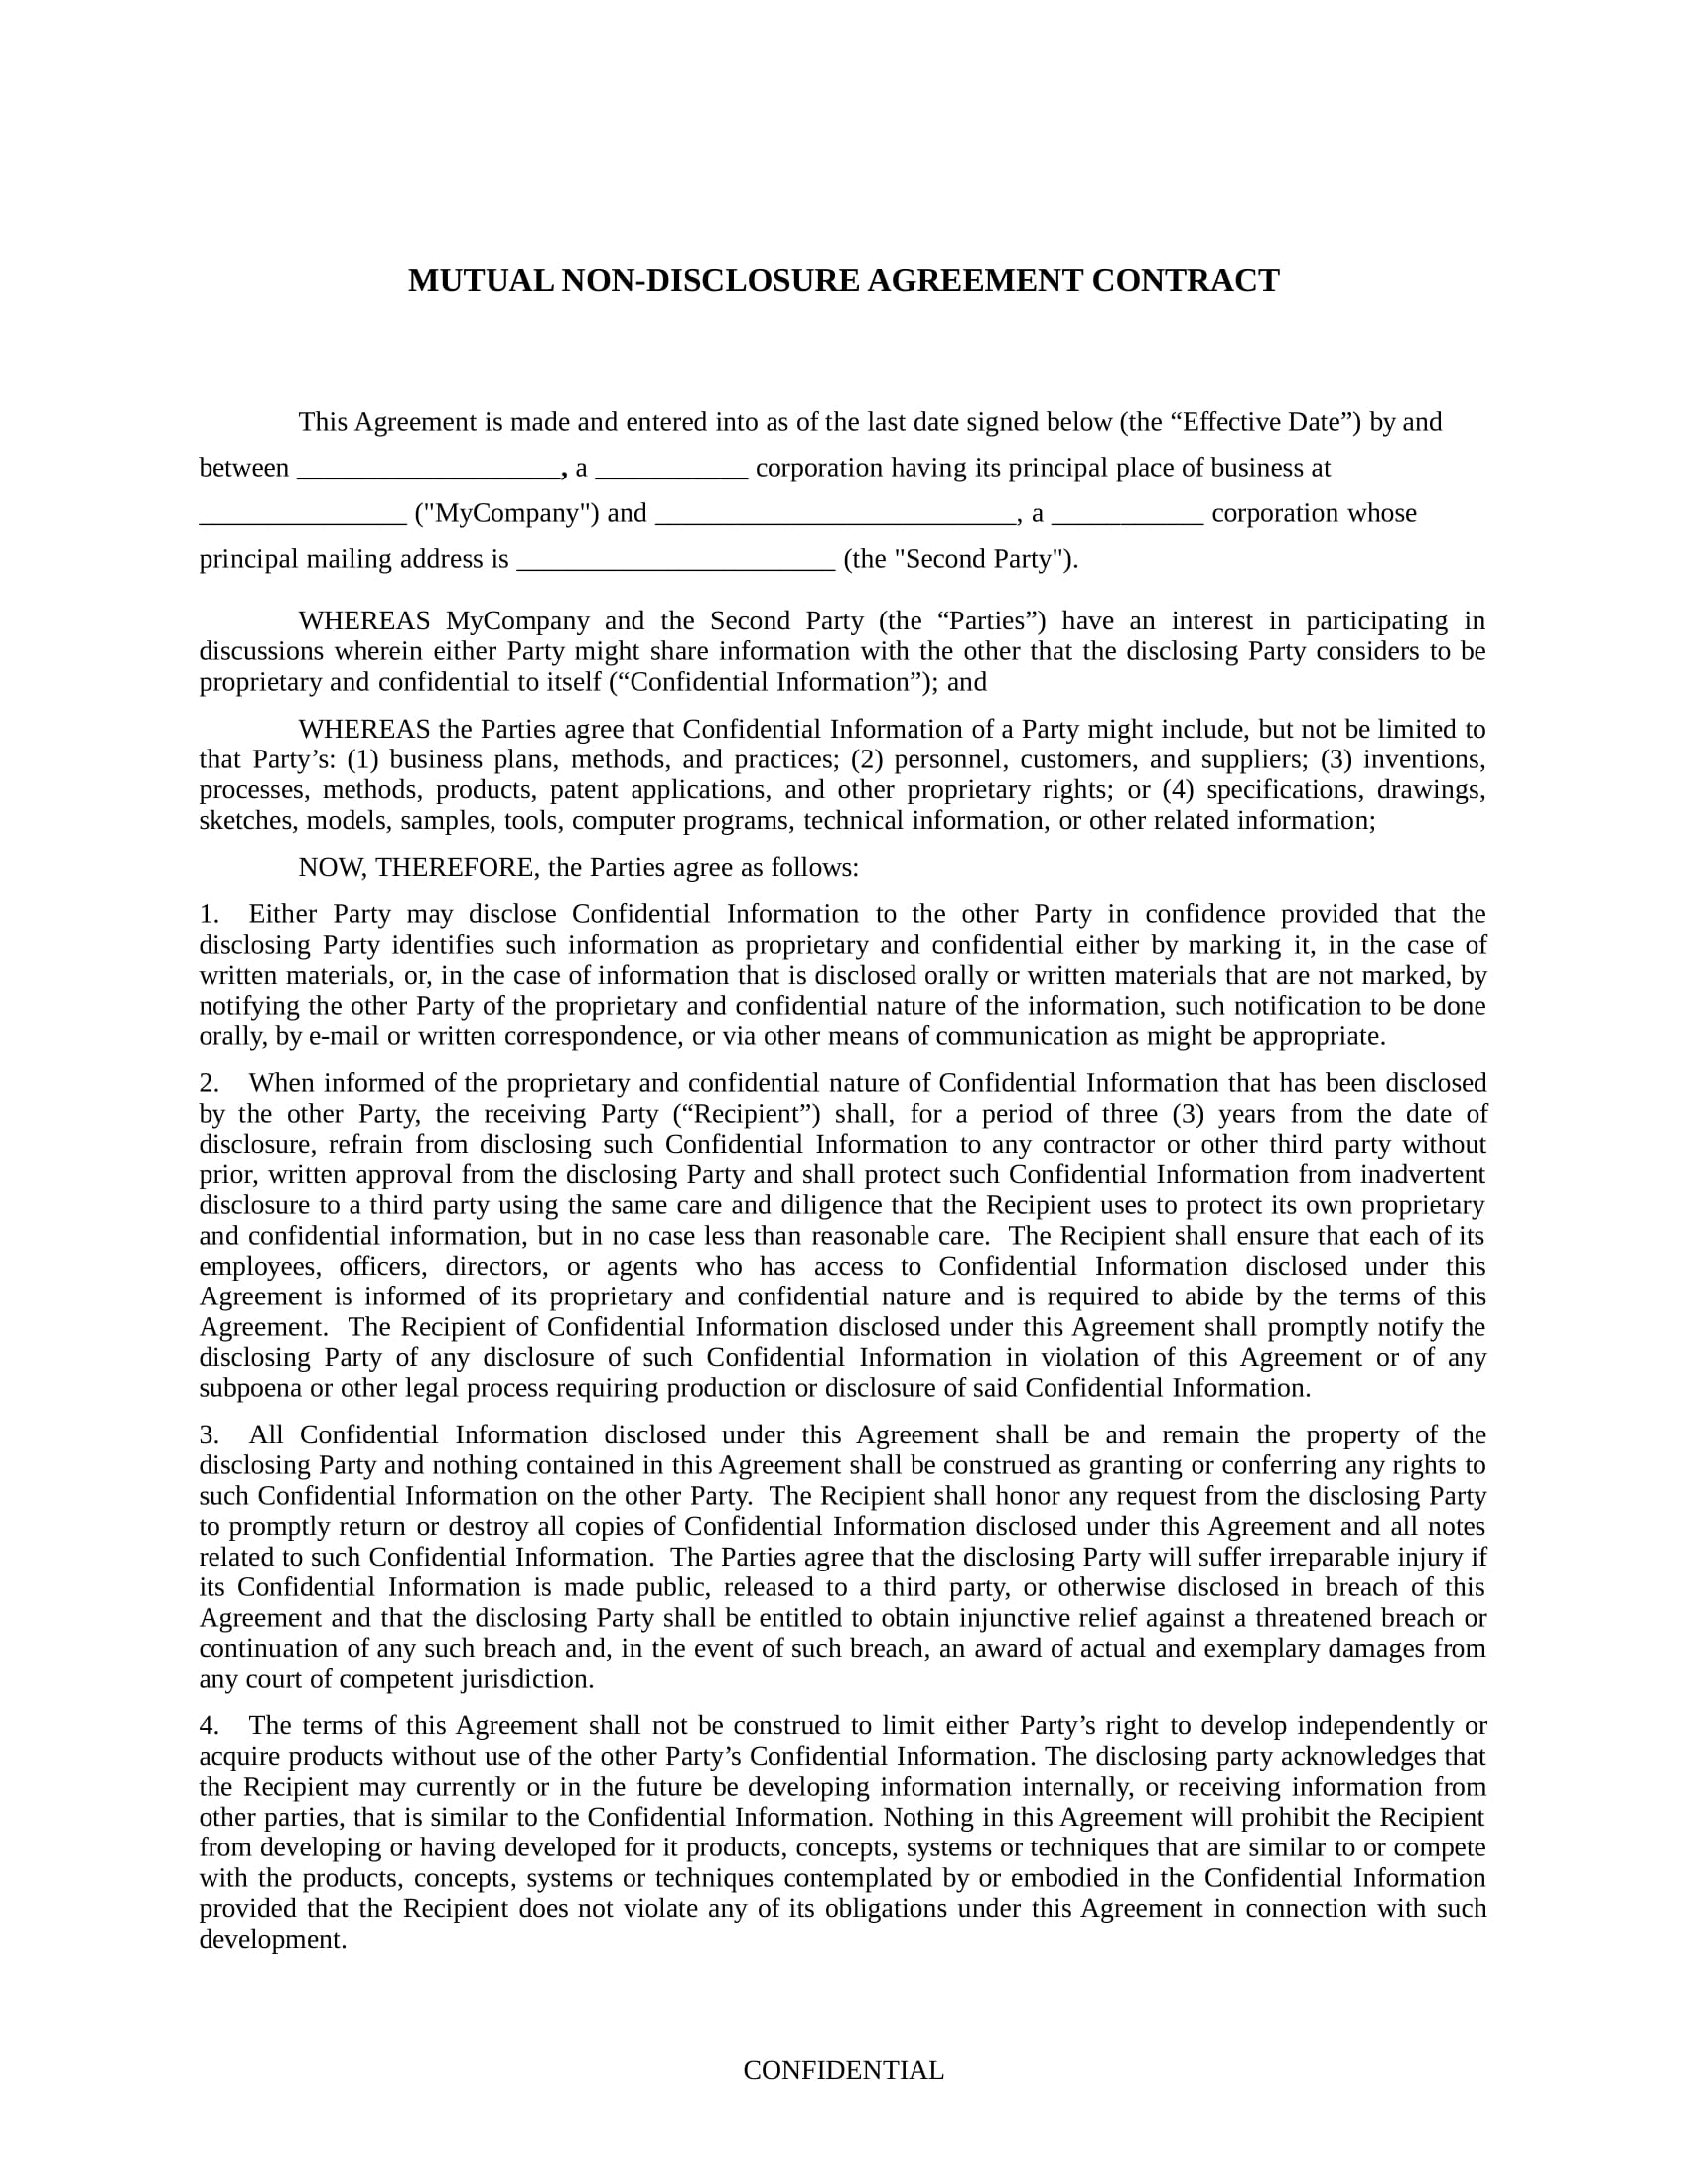 mutual non disclosure agreement contract form in doc 1